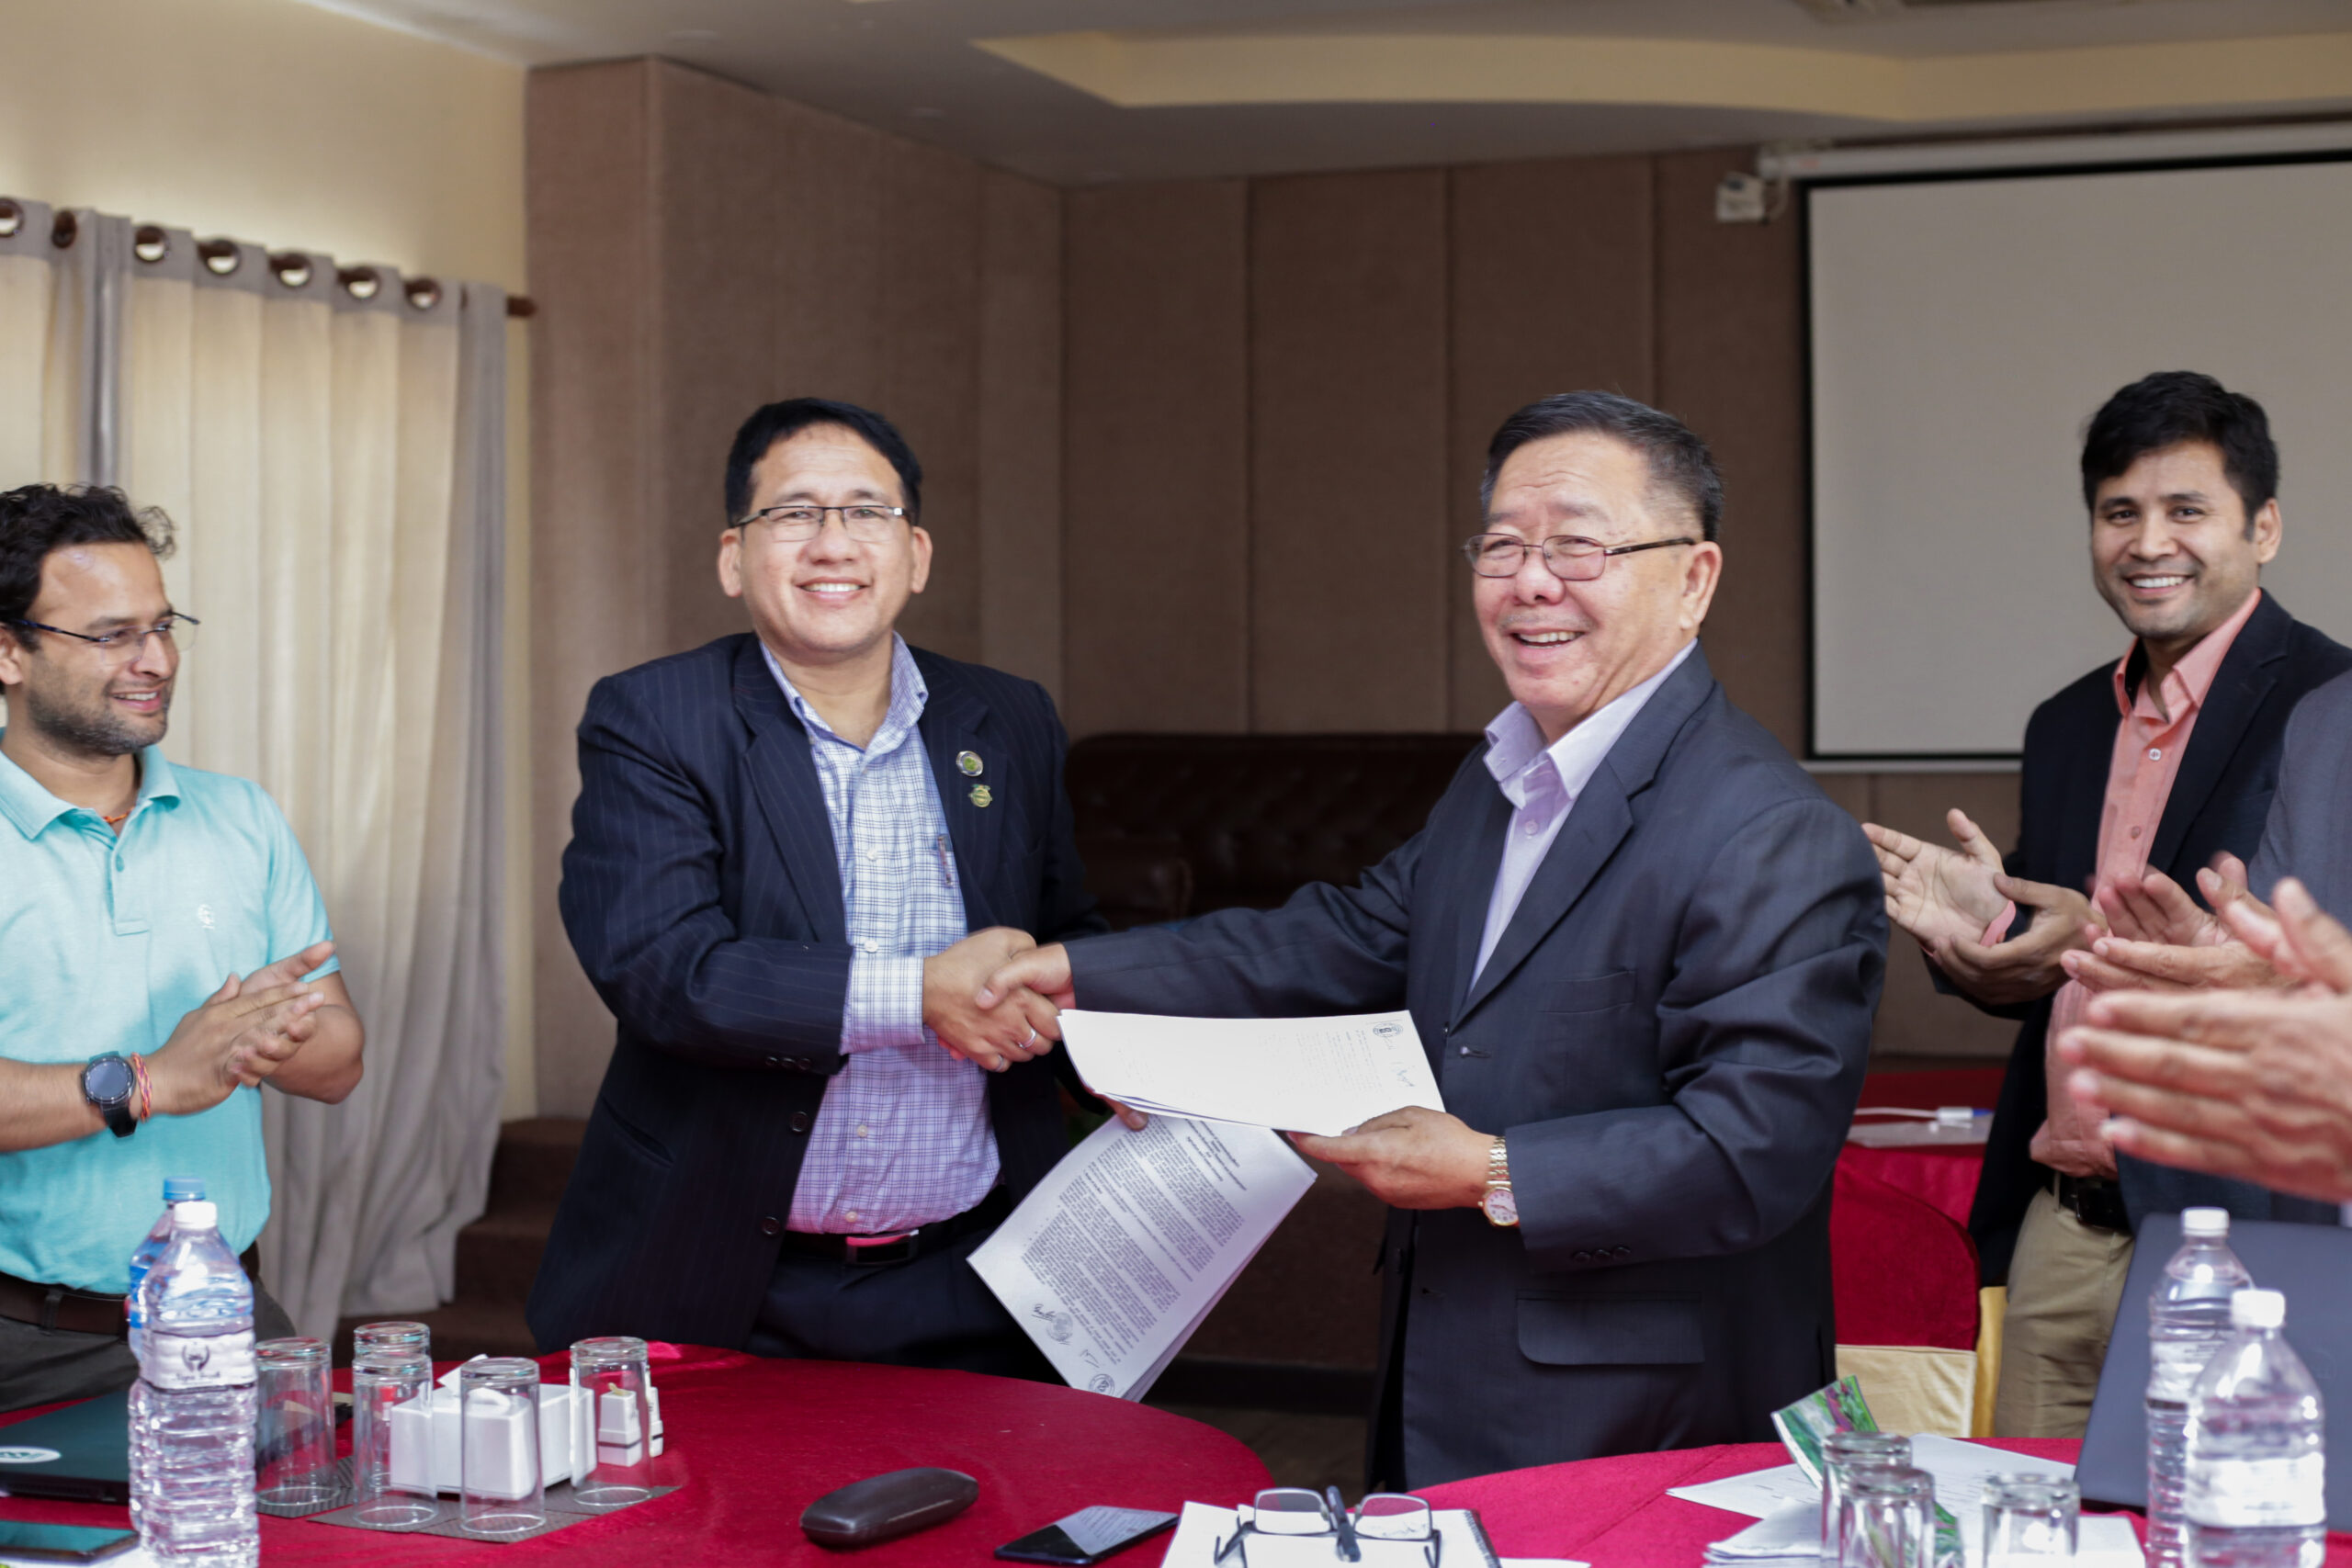 LI-BIRD and AFU Signed a Memorandum of Understanding for Fostering Collaborative Research and Development in the field of Agriculture and Natural Resource Management